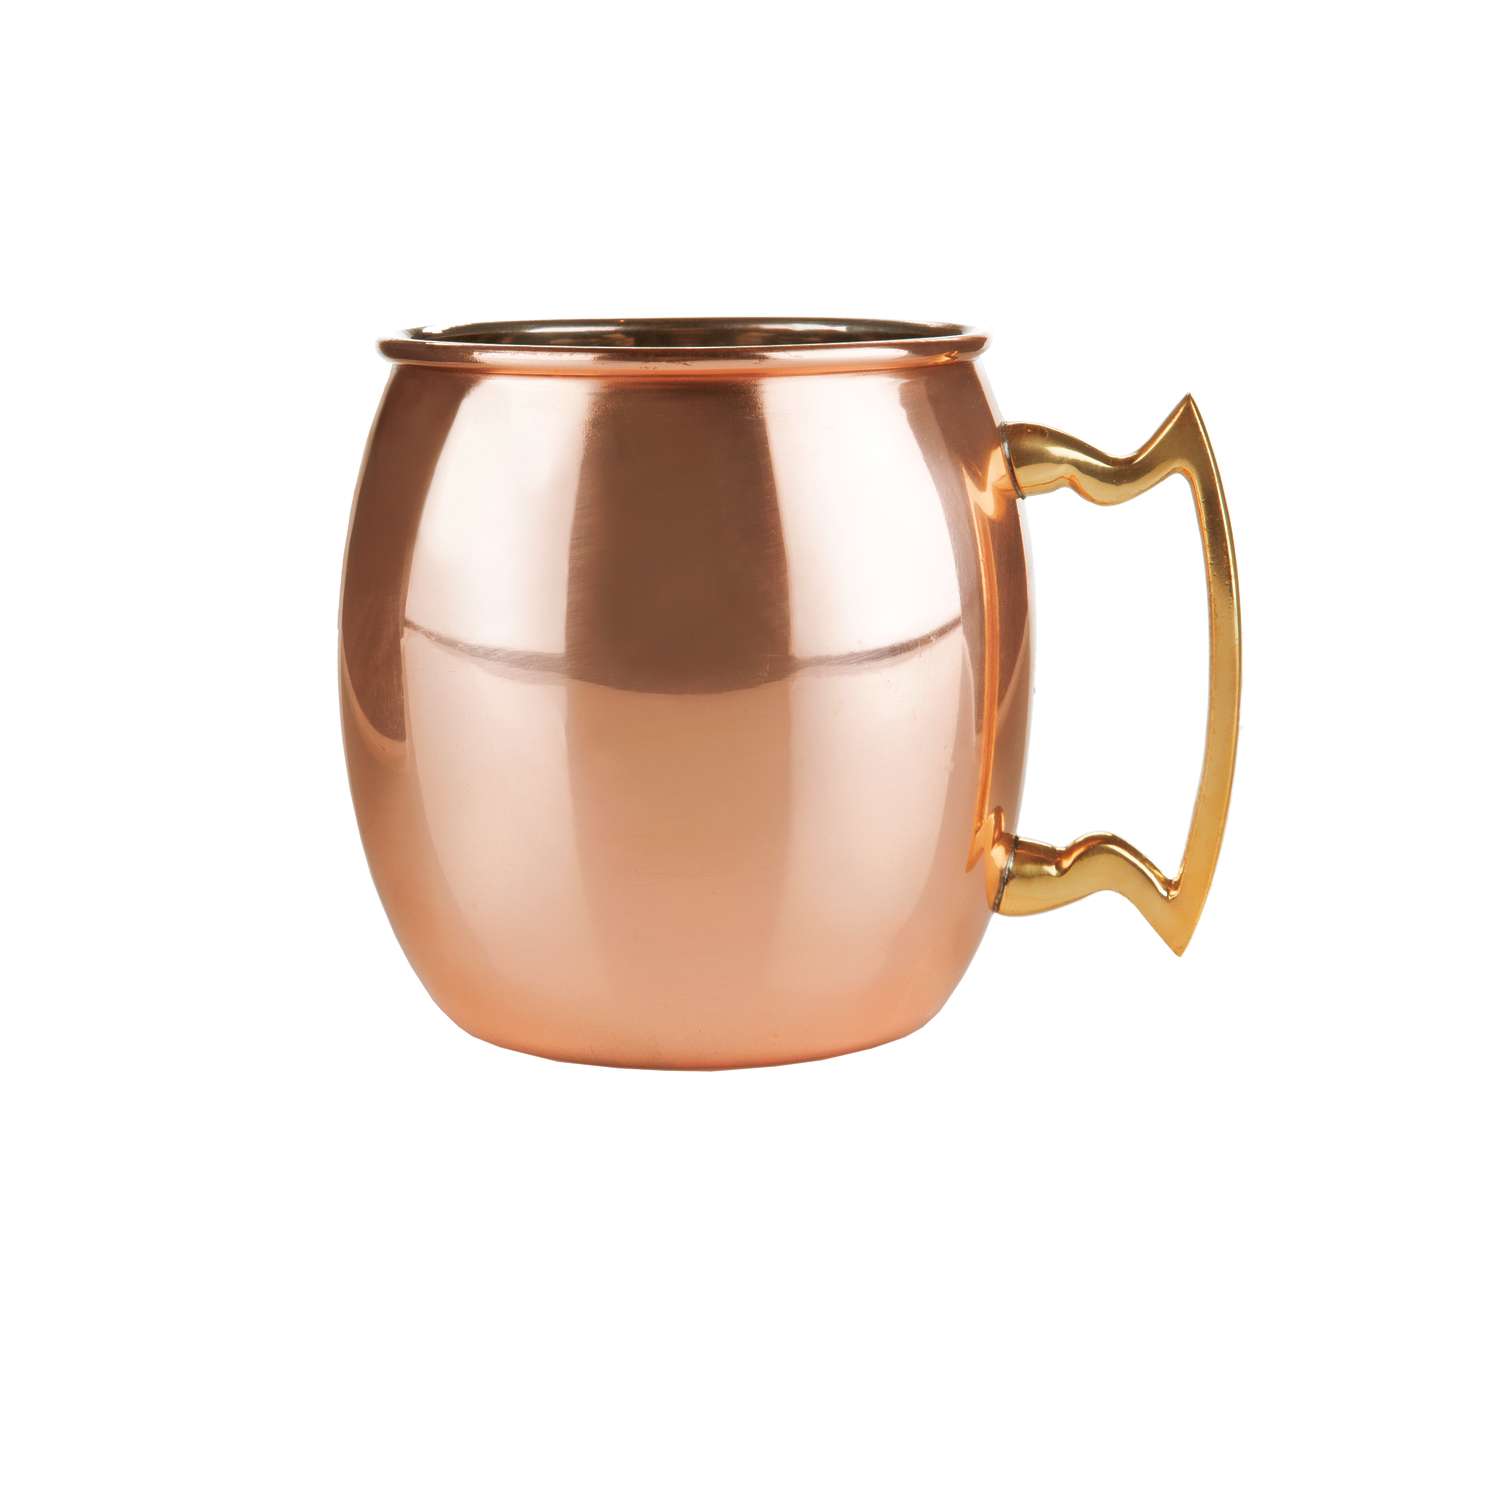 Moscow Mule Copper Mugs with Handles (4-Pack) 1 Shot Glass Classic Drinking  Cup Set Home, Kitchen, Bar Drinkware Helps Keep Drinks Colder, Longer